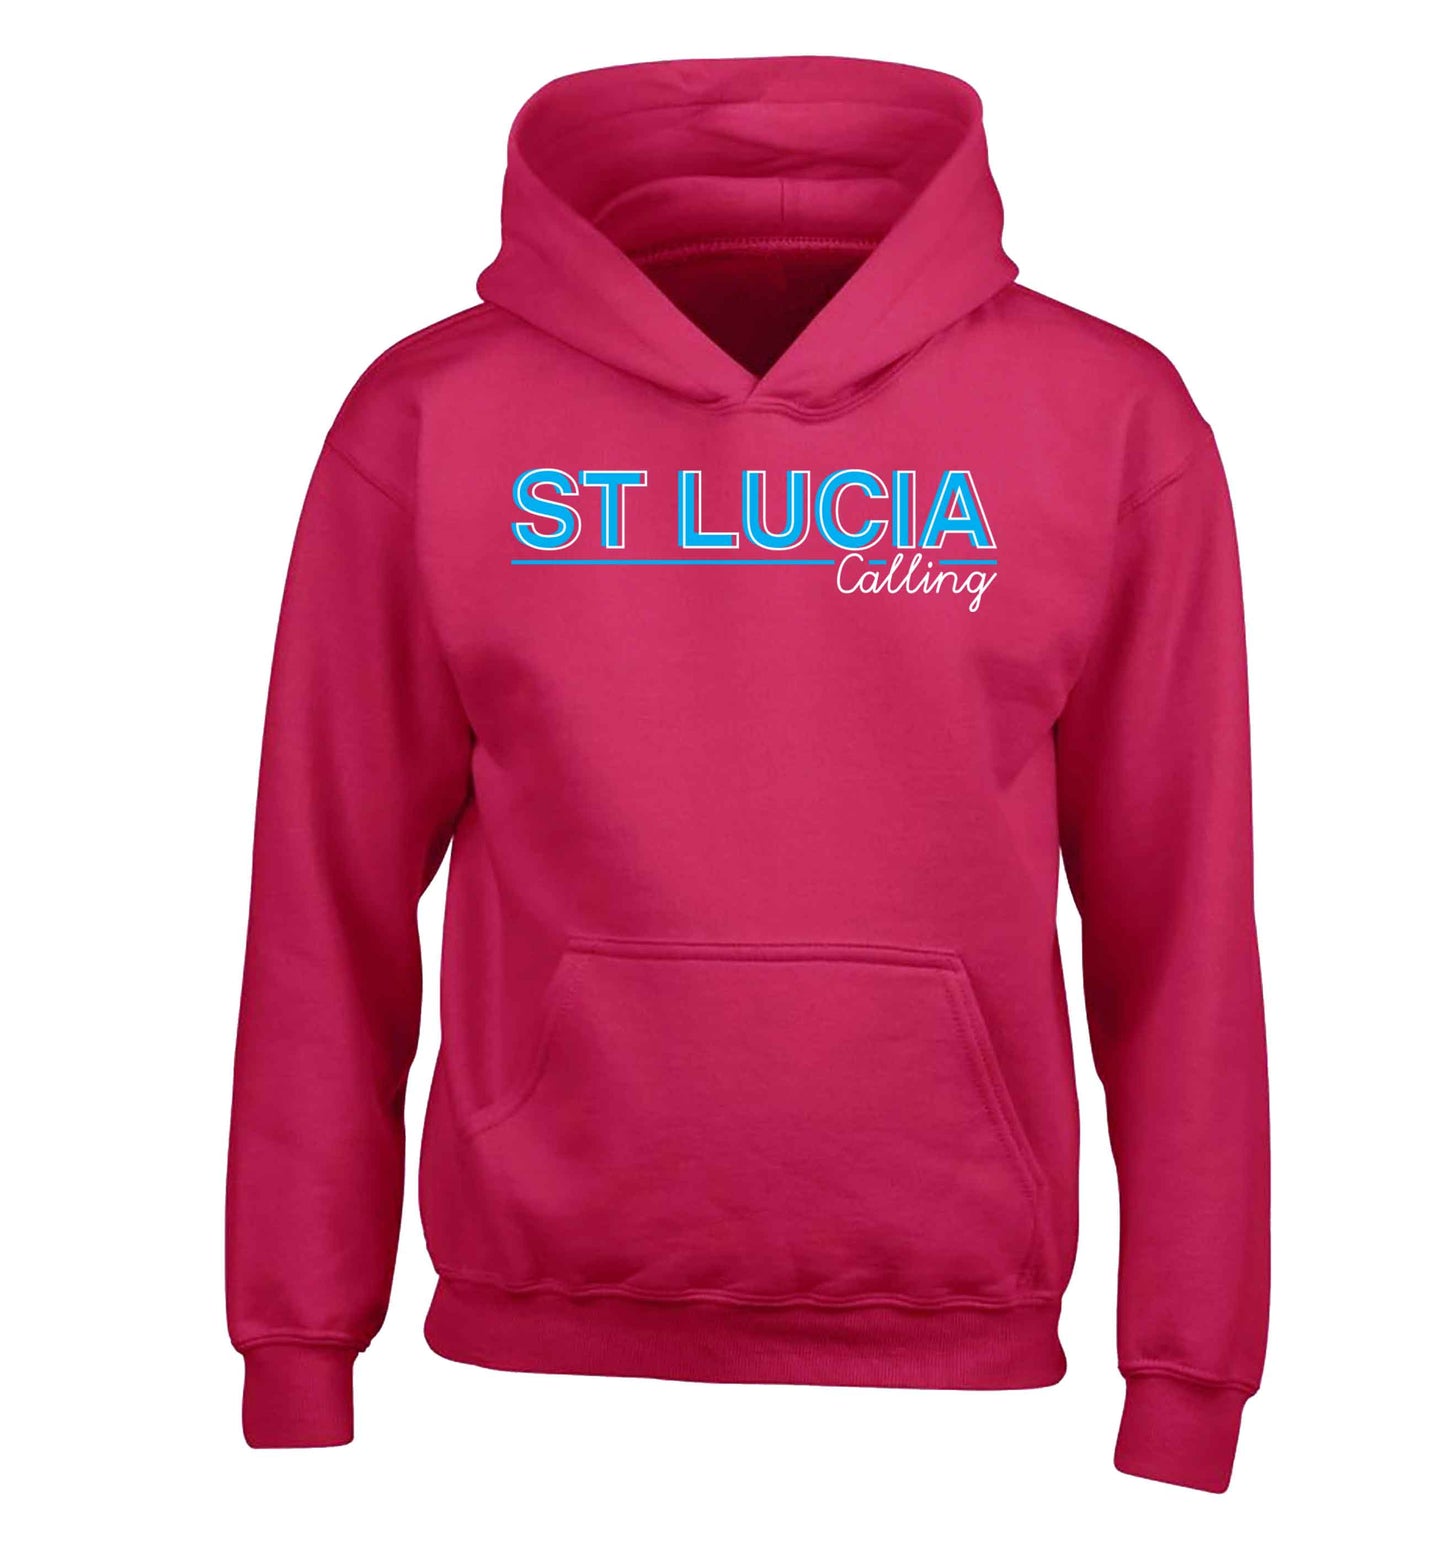 St Lucia calling children's pink hoodie 12-13 Years